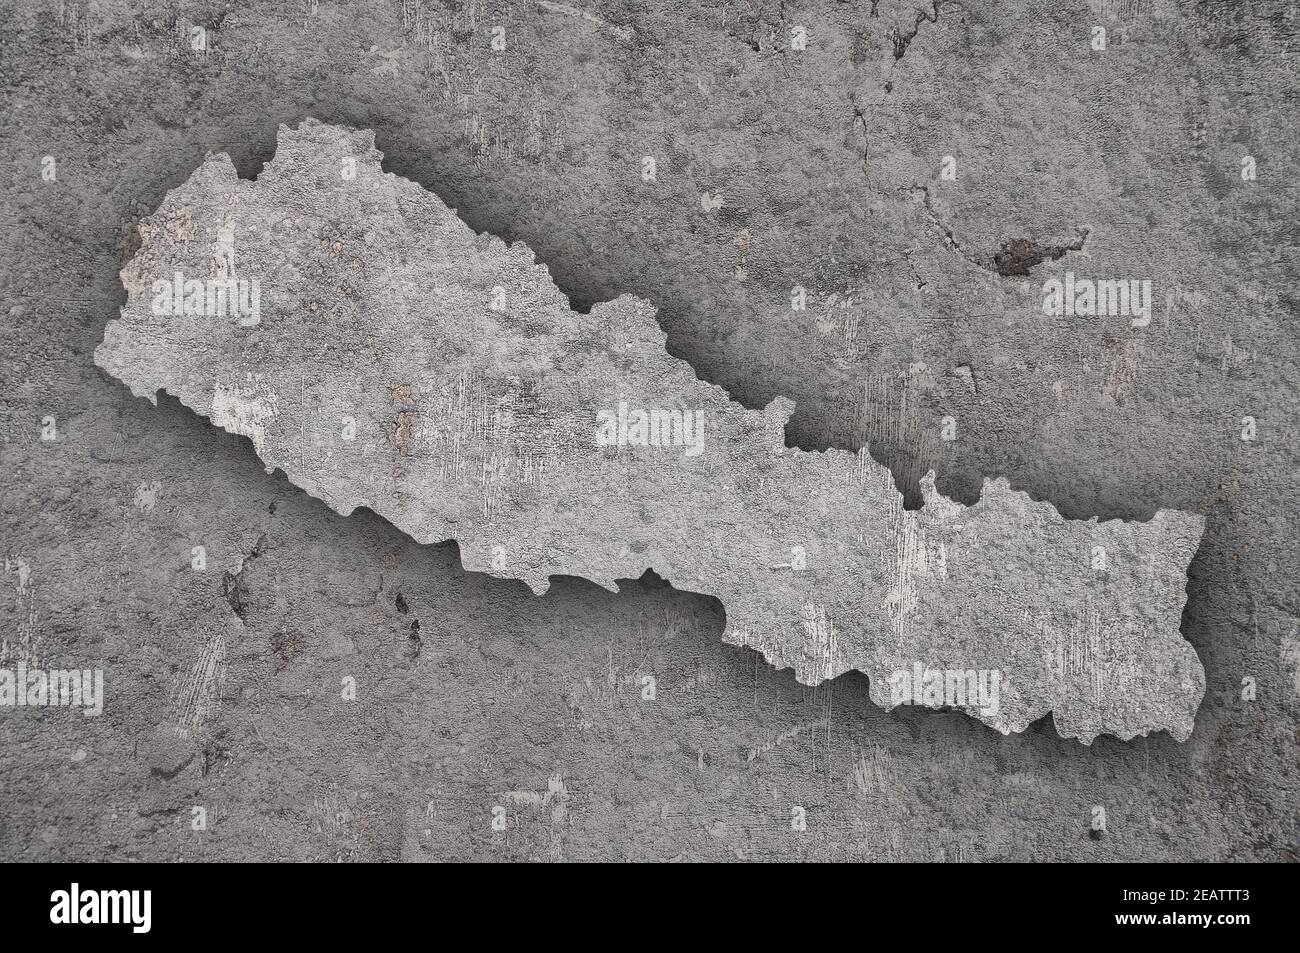 Map of Nepal on weathered concrete Stock Photo